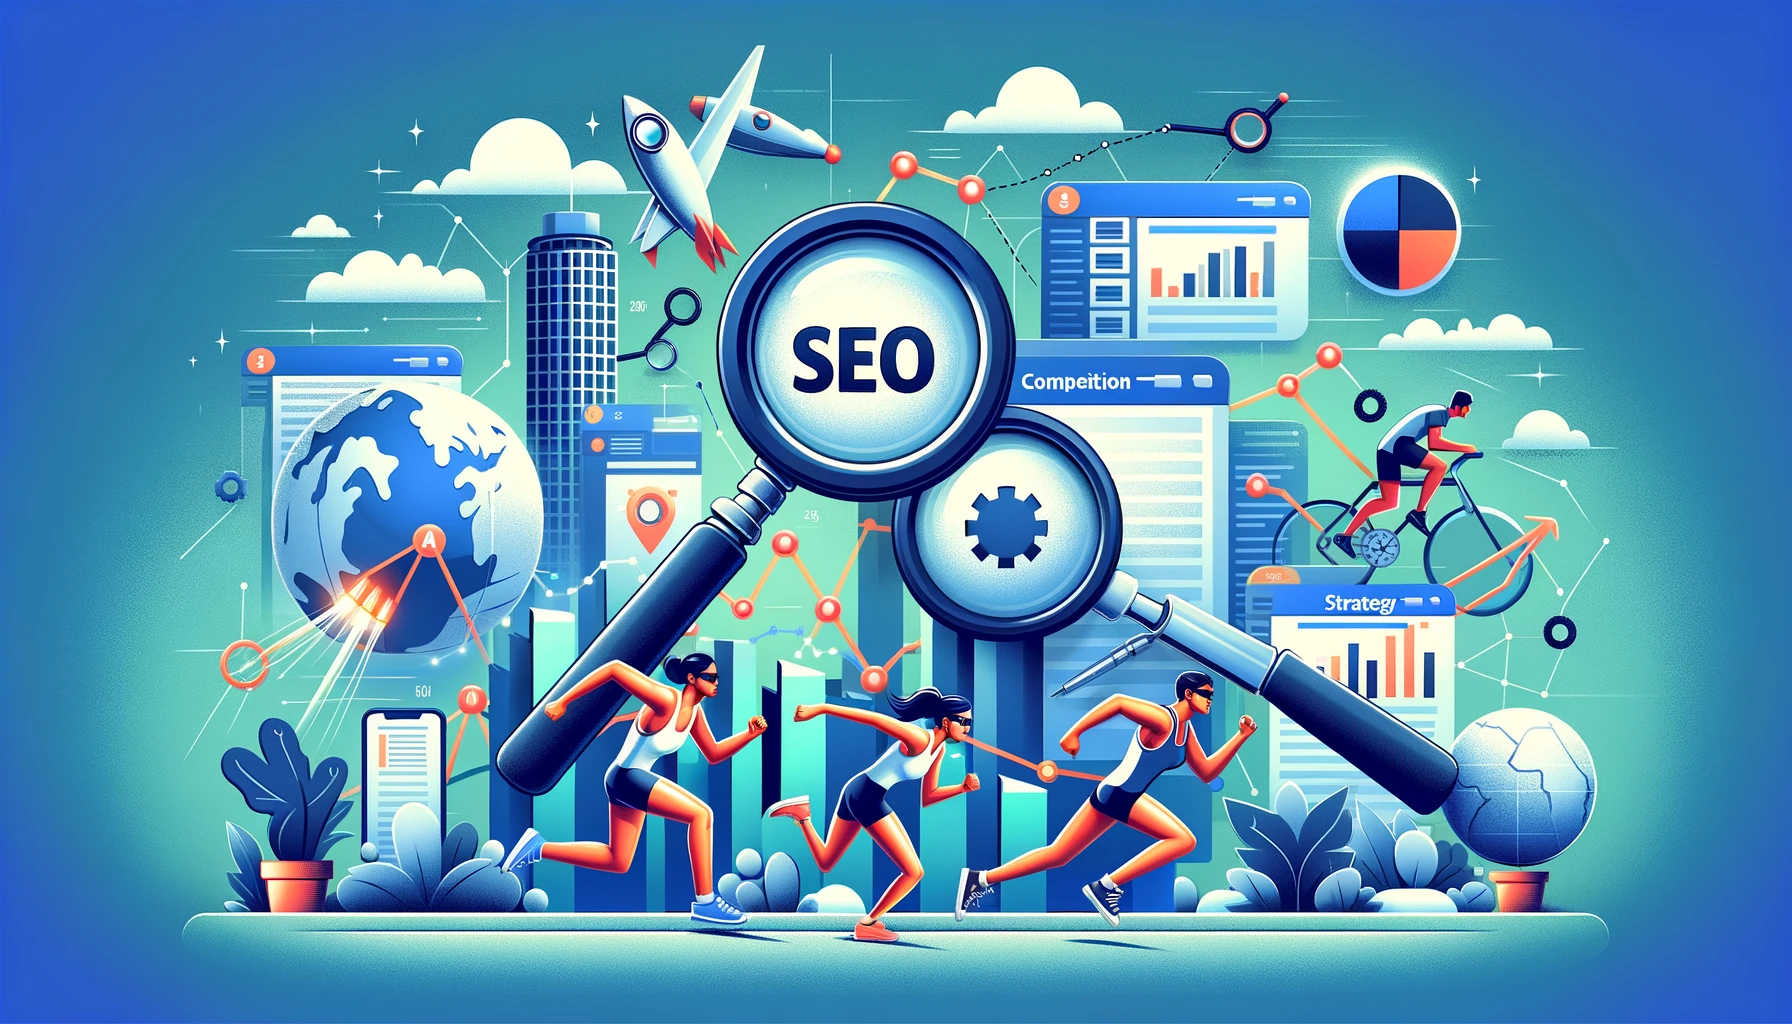 Illustration of Competitive Keyword Analysis, depicting magnifying glasses on keywords, a digital competition landscape, graphs of keyword performance, and SEO tools, emphasizing the strategic analysis for SEO success.